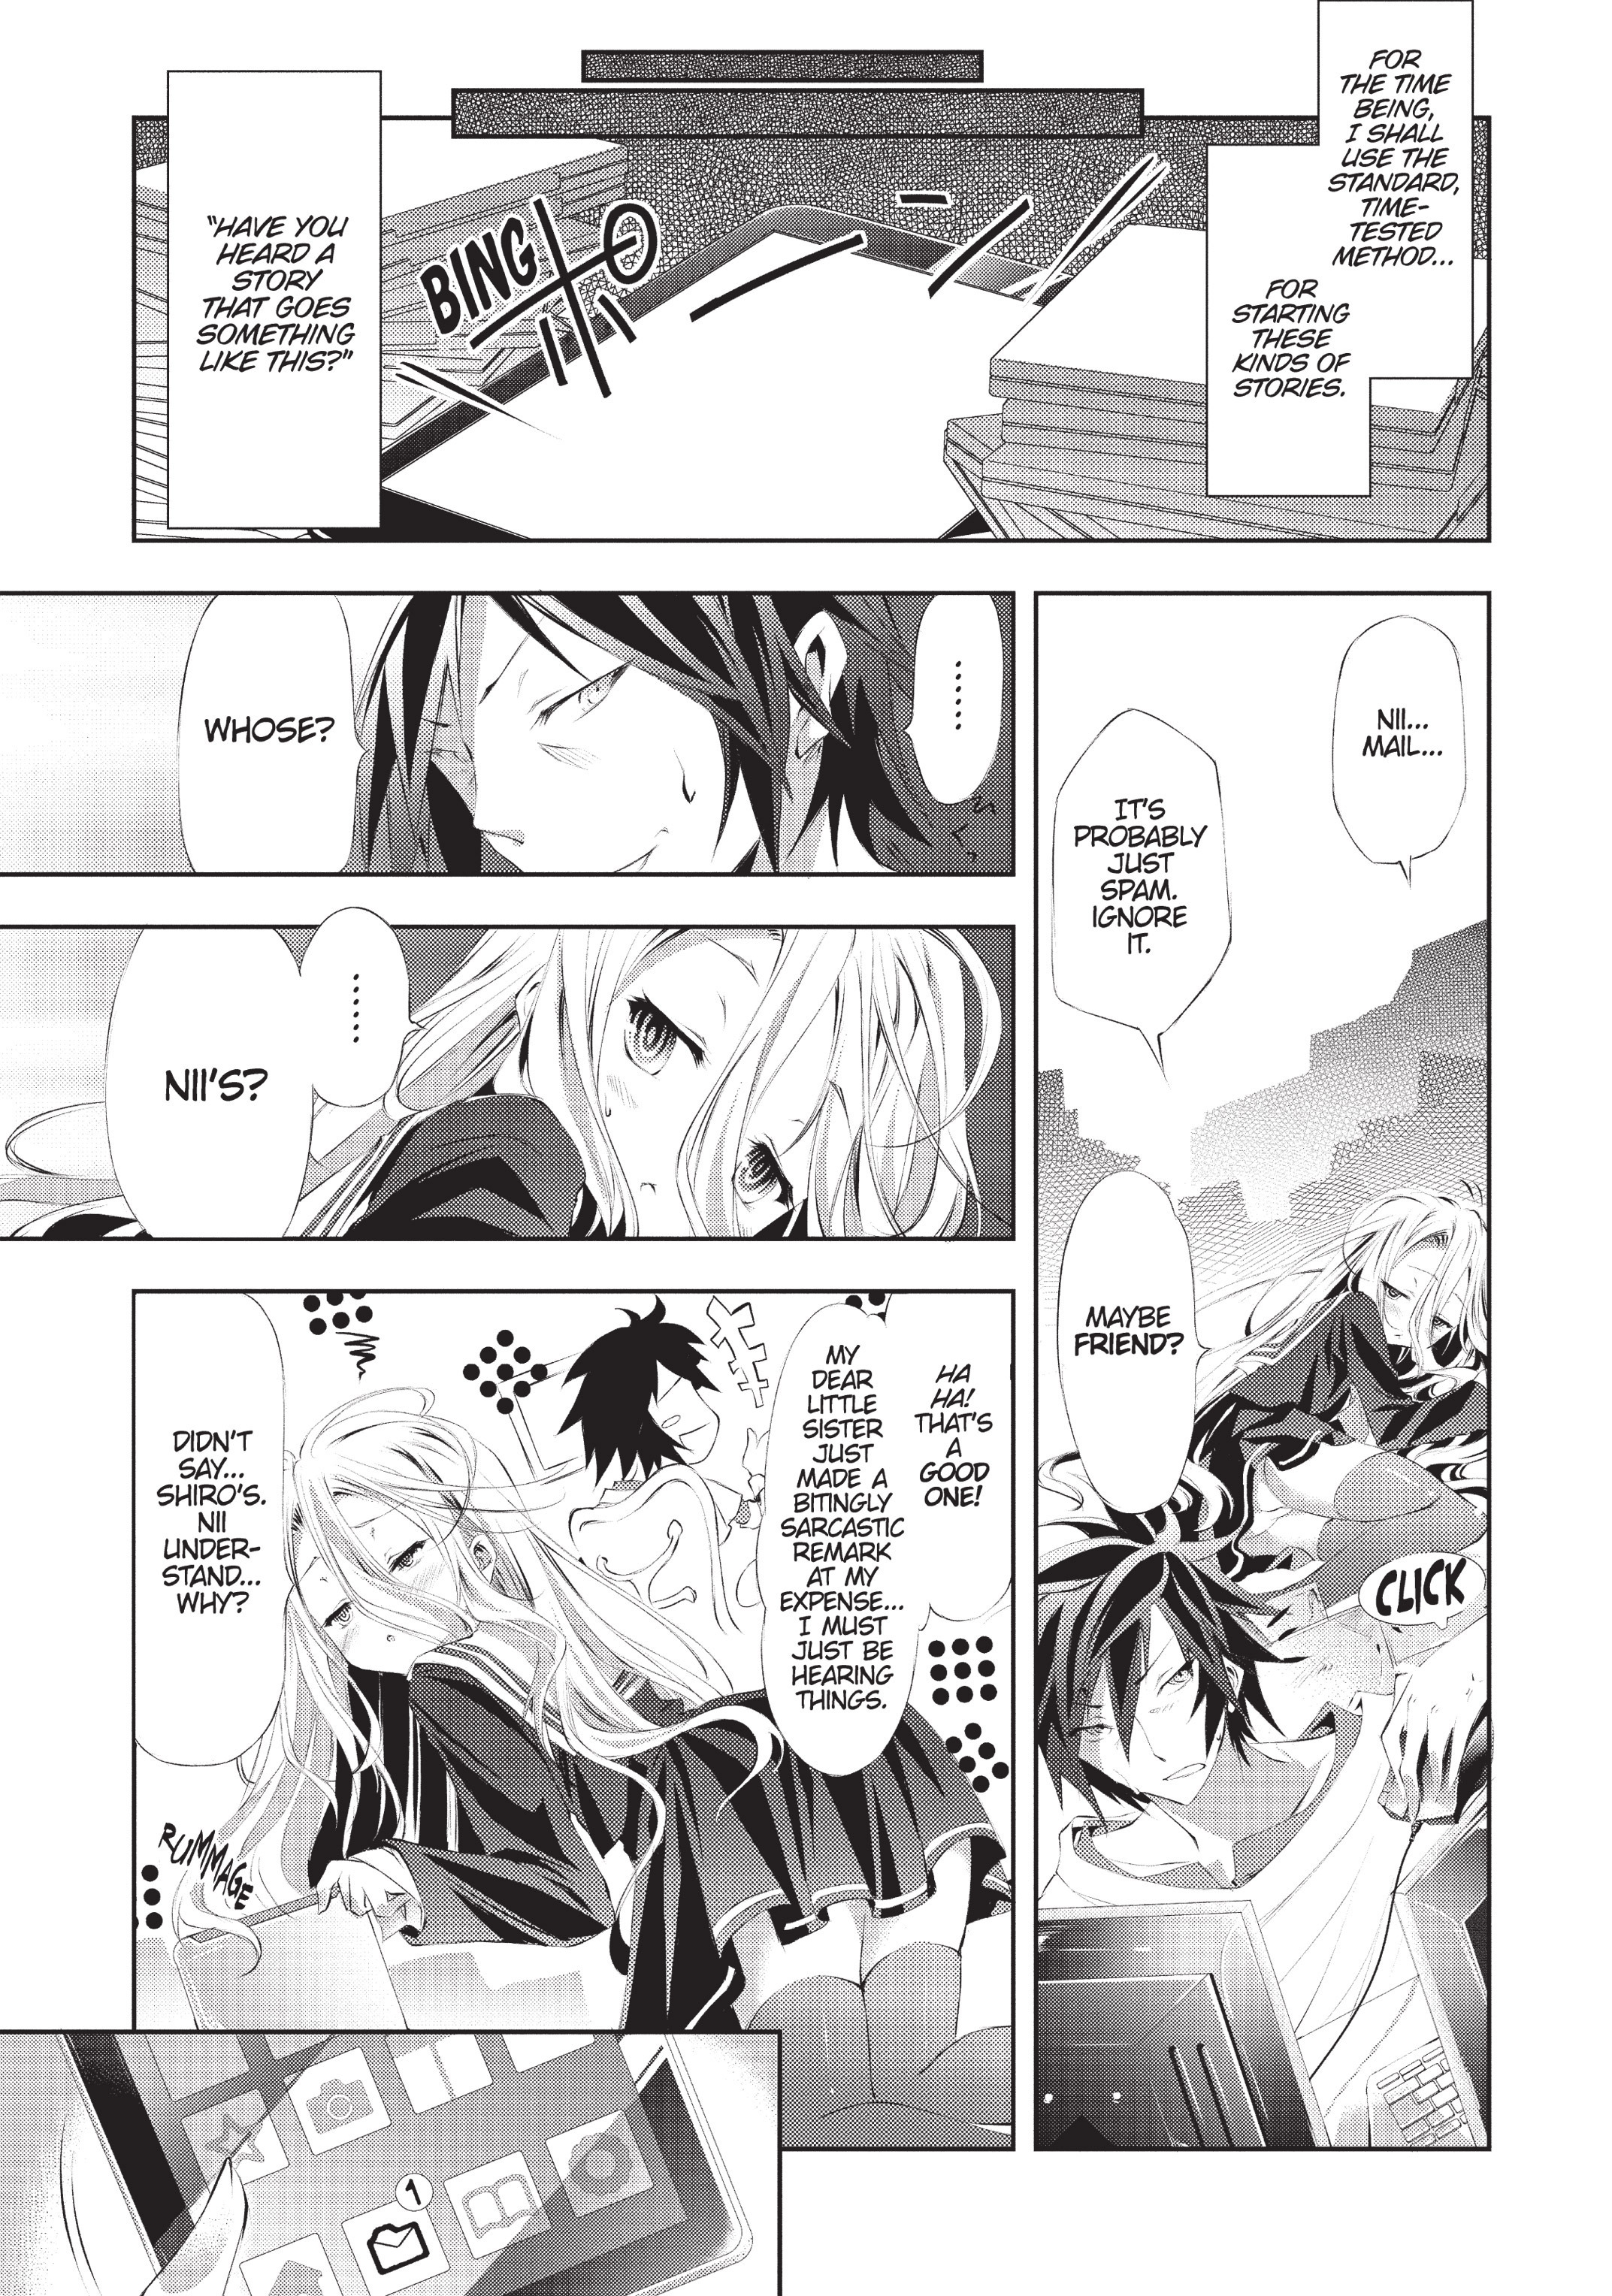 Read online No Game, No Life comic -  Issue # Full - 17